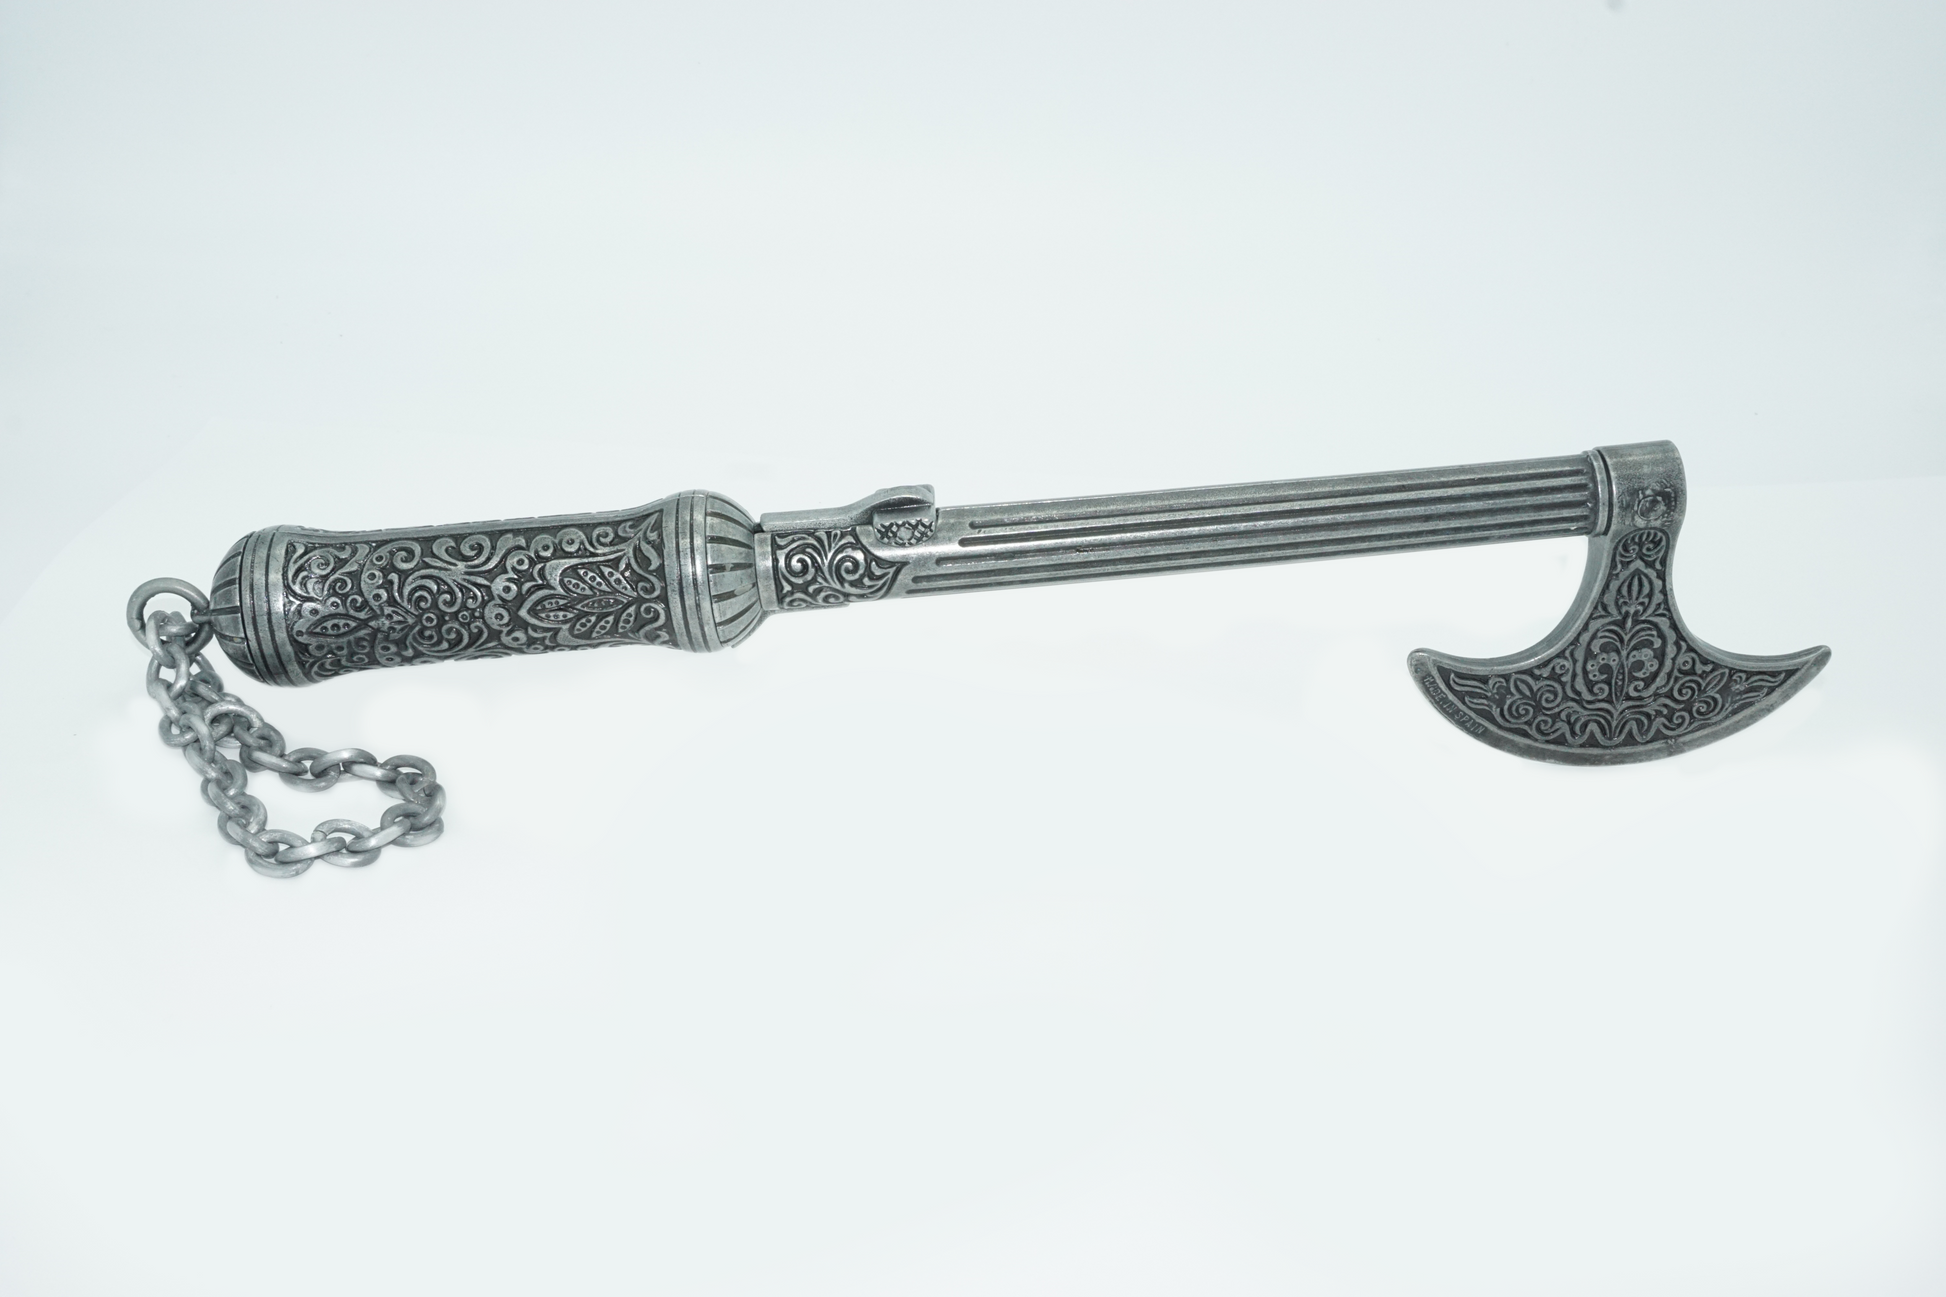 Full side view of ottoman axe pistol including the barral which also acts as the main shaft of the axe.